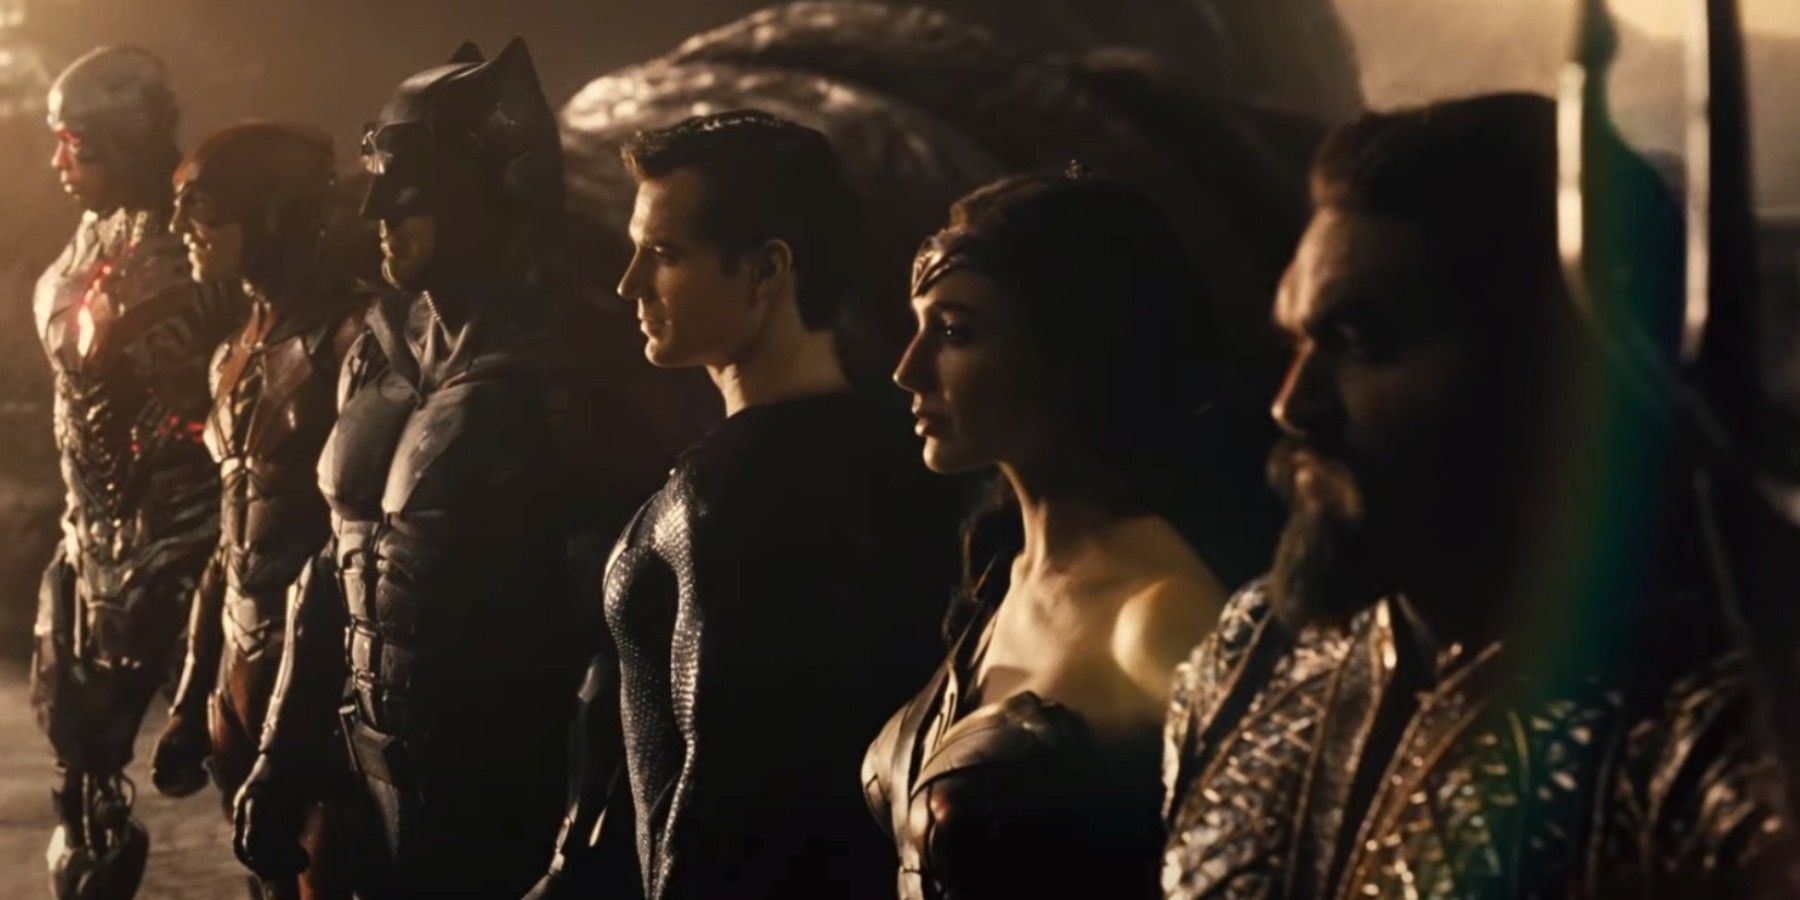 The Justice League gazing at their victory in Zack Snyder's Justice League